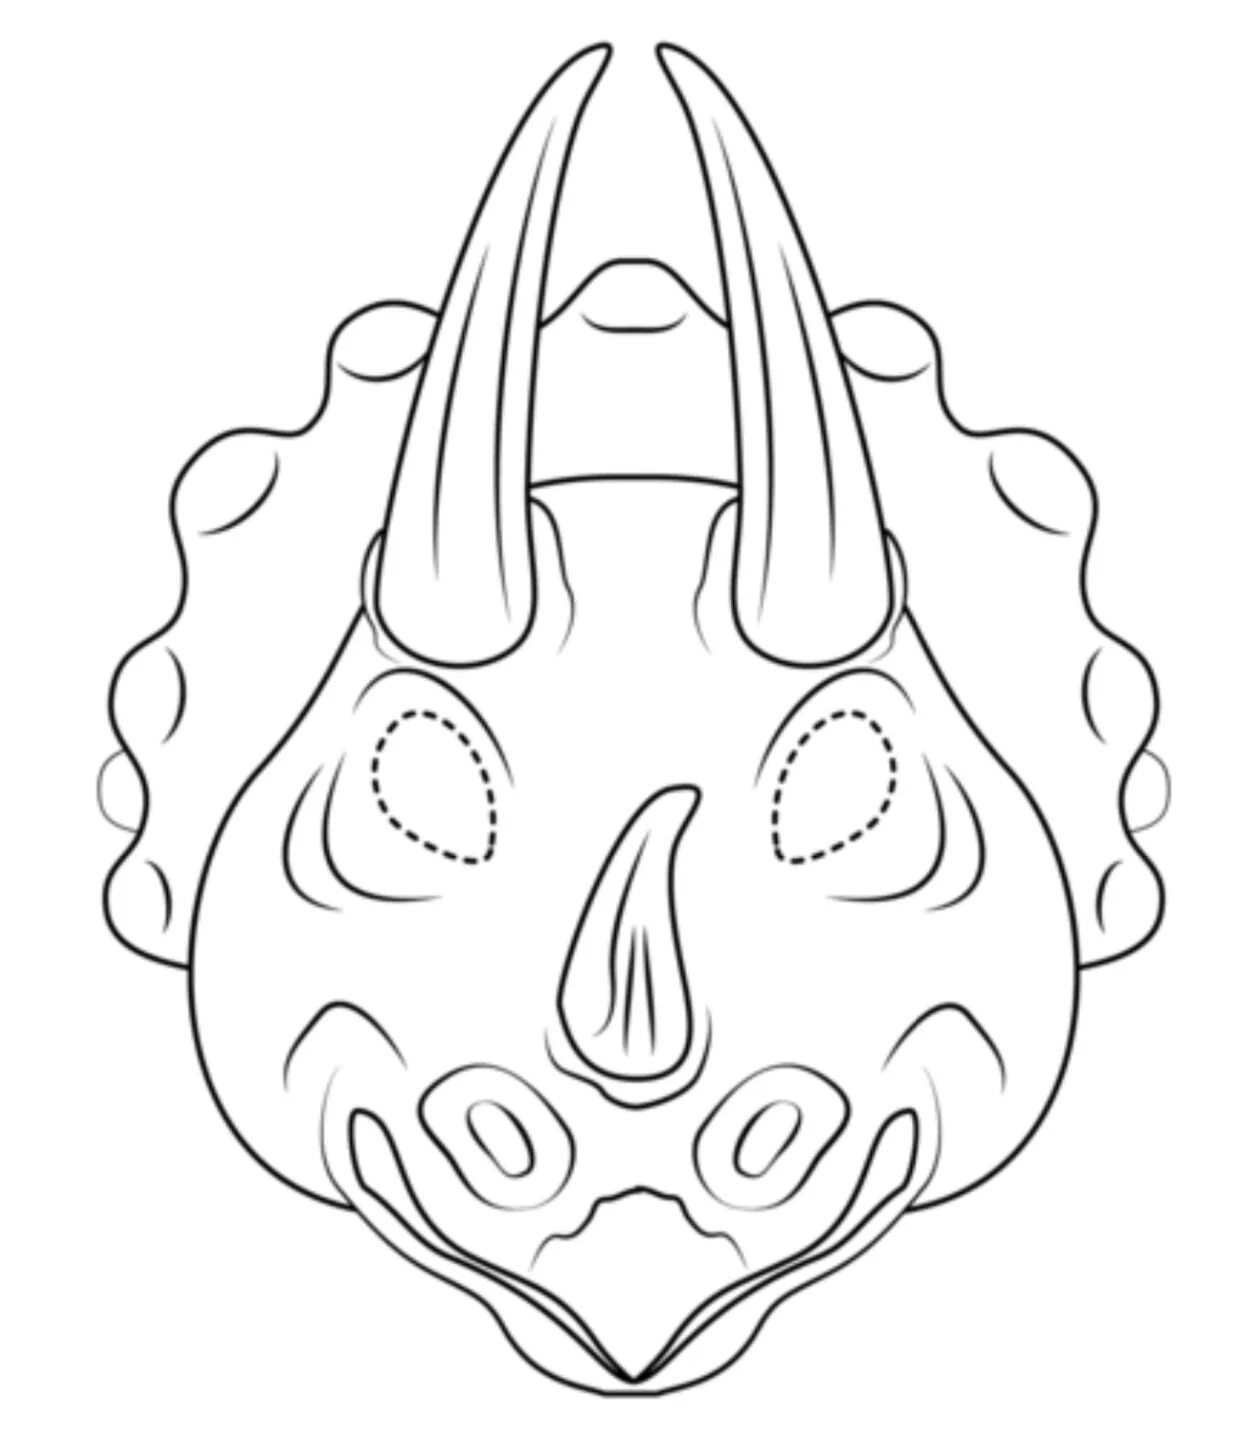 Majestic dinosaur mask coloring page